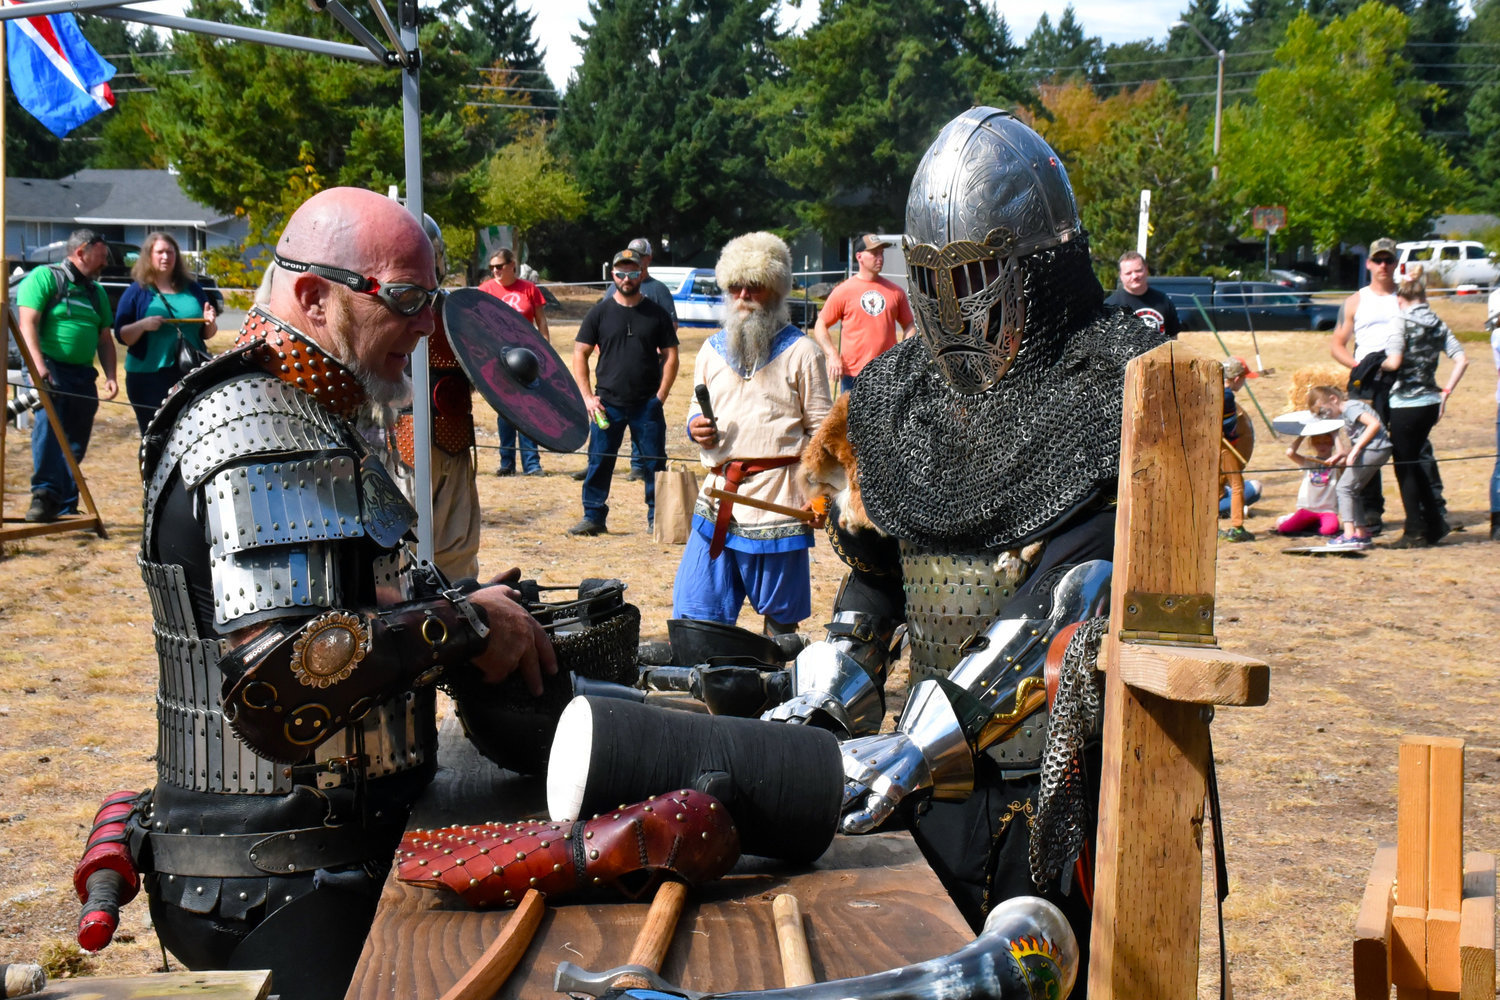 William Koutrouba, left, the organizer of the NorseWest Viking Festival which was held at Wilkowski Park on Sept. 11-12, 2021, dons some armor to participate in swordfighting following a poker run in honor of those affected by the events of Sept. 11, 2001.